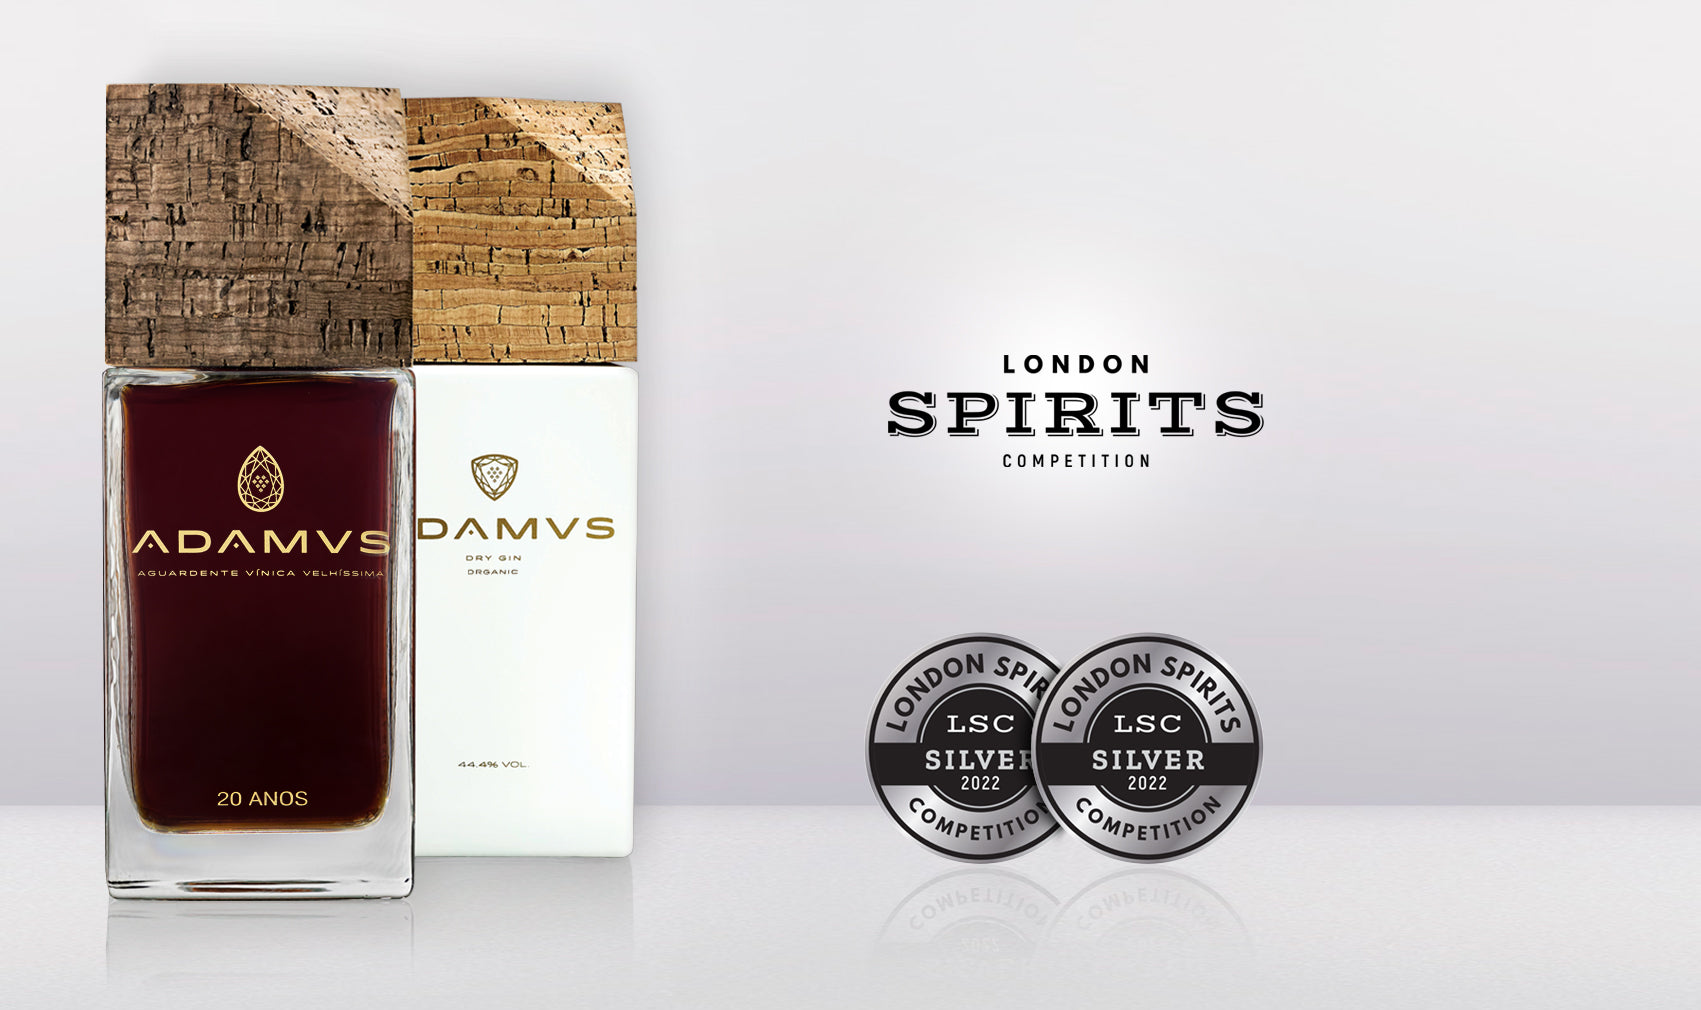 Adamus Won 2 Silver Medals at the London Spirits Competition